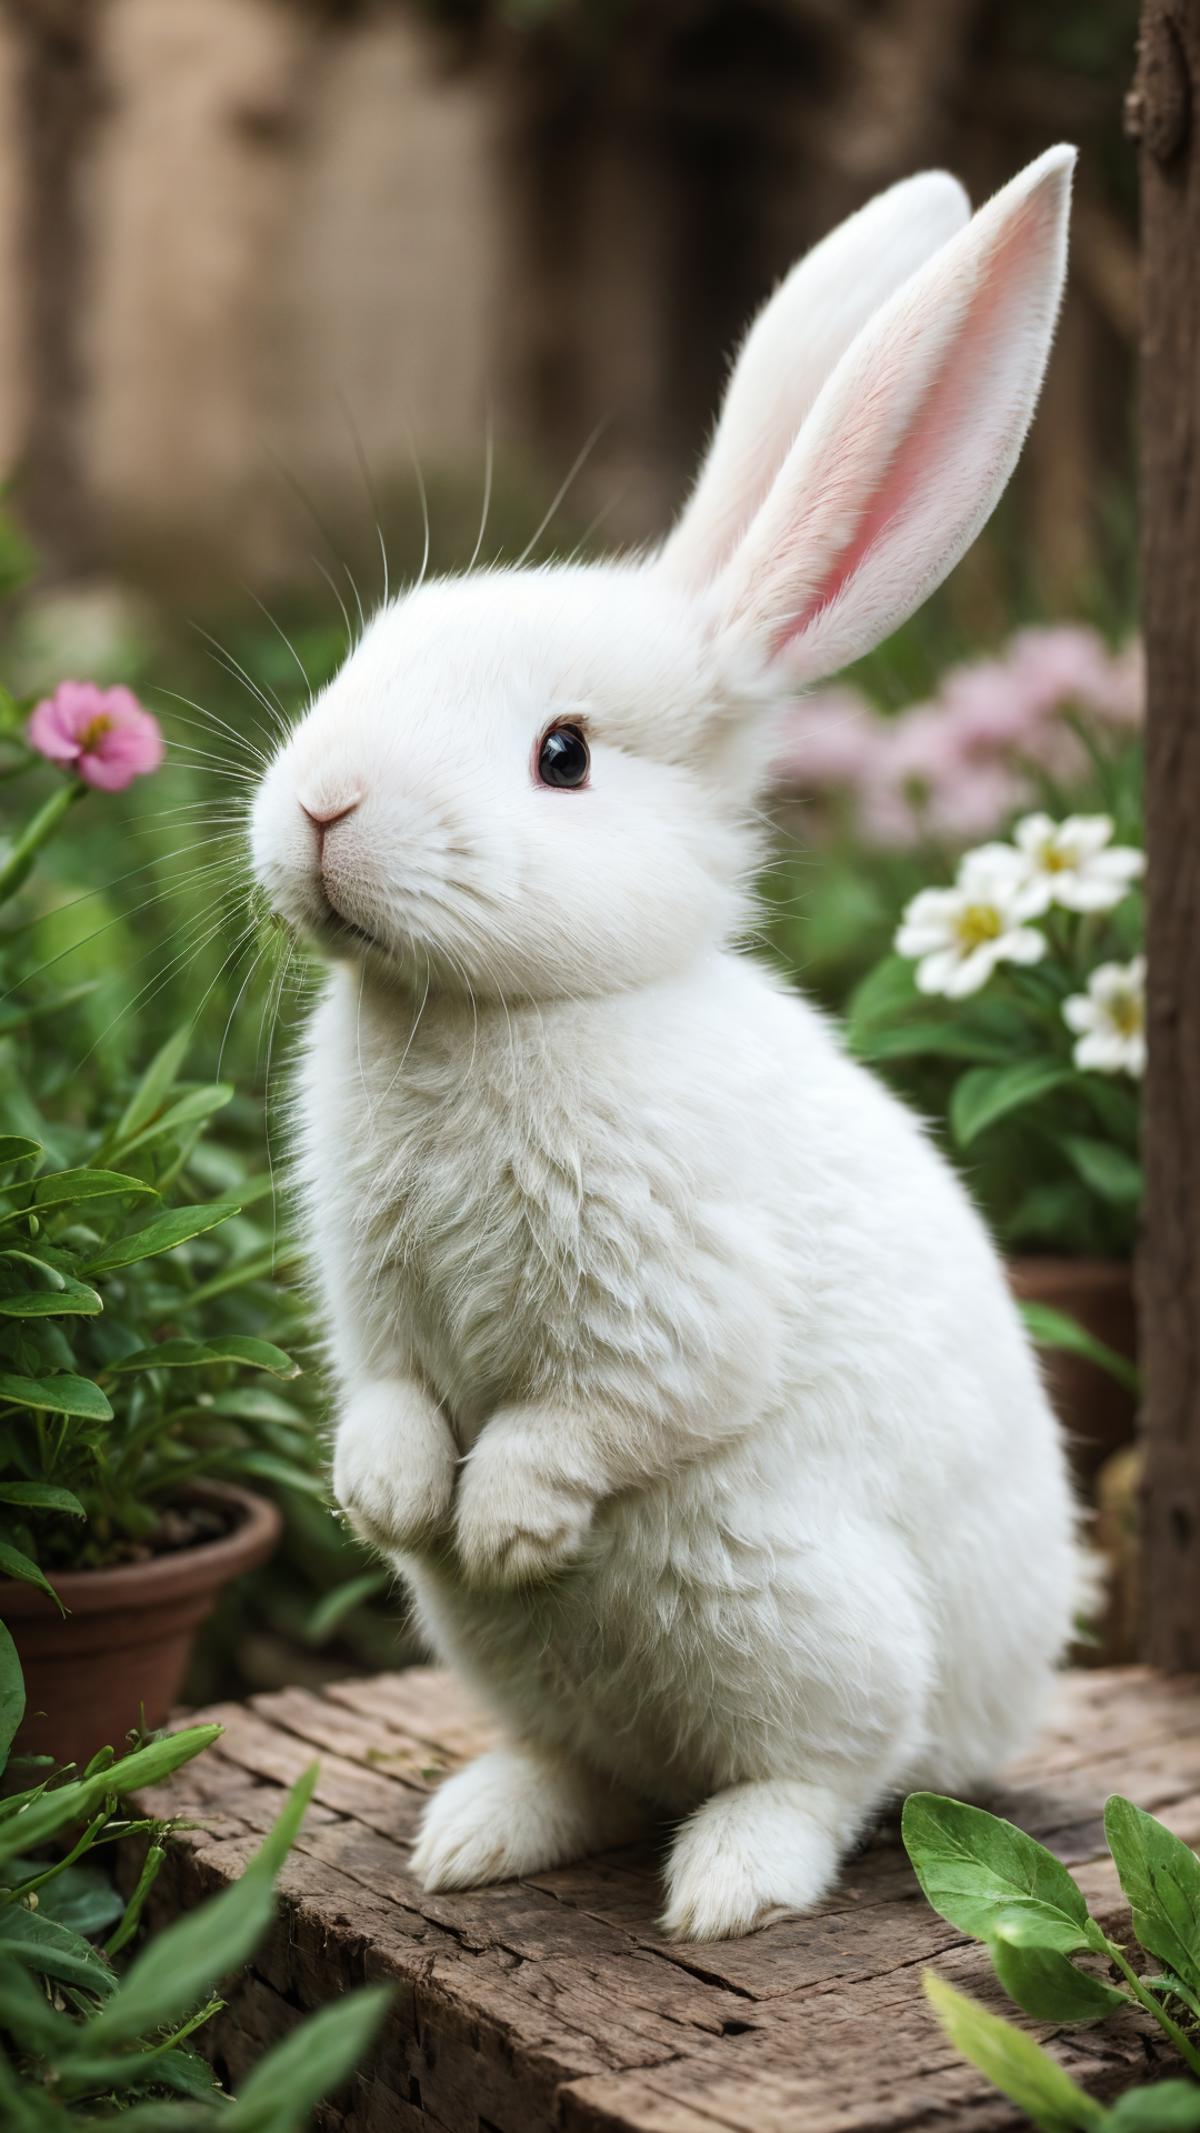 A small white rabbit with brown ears and a brown nose, standing in a garden among flowers.